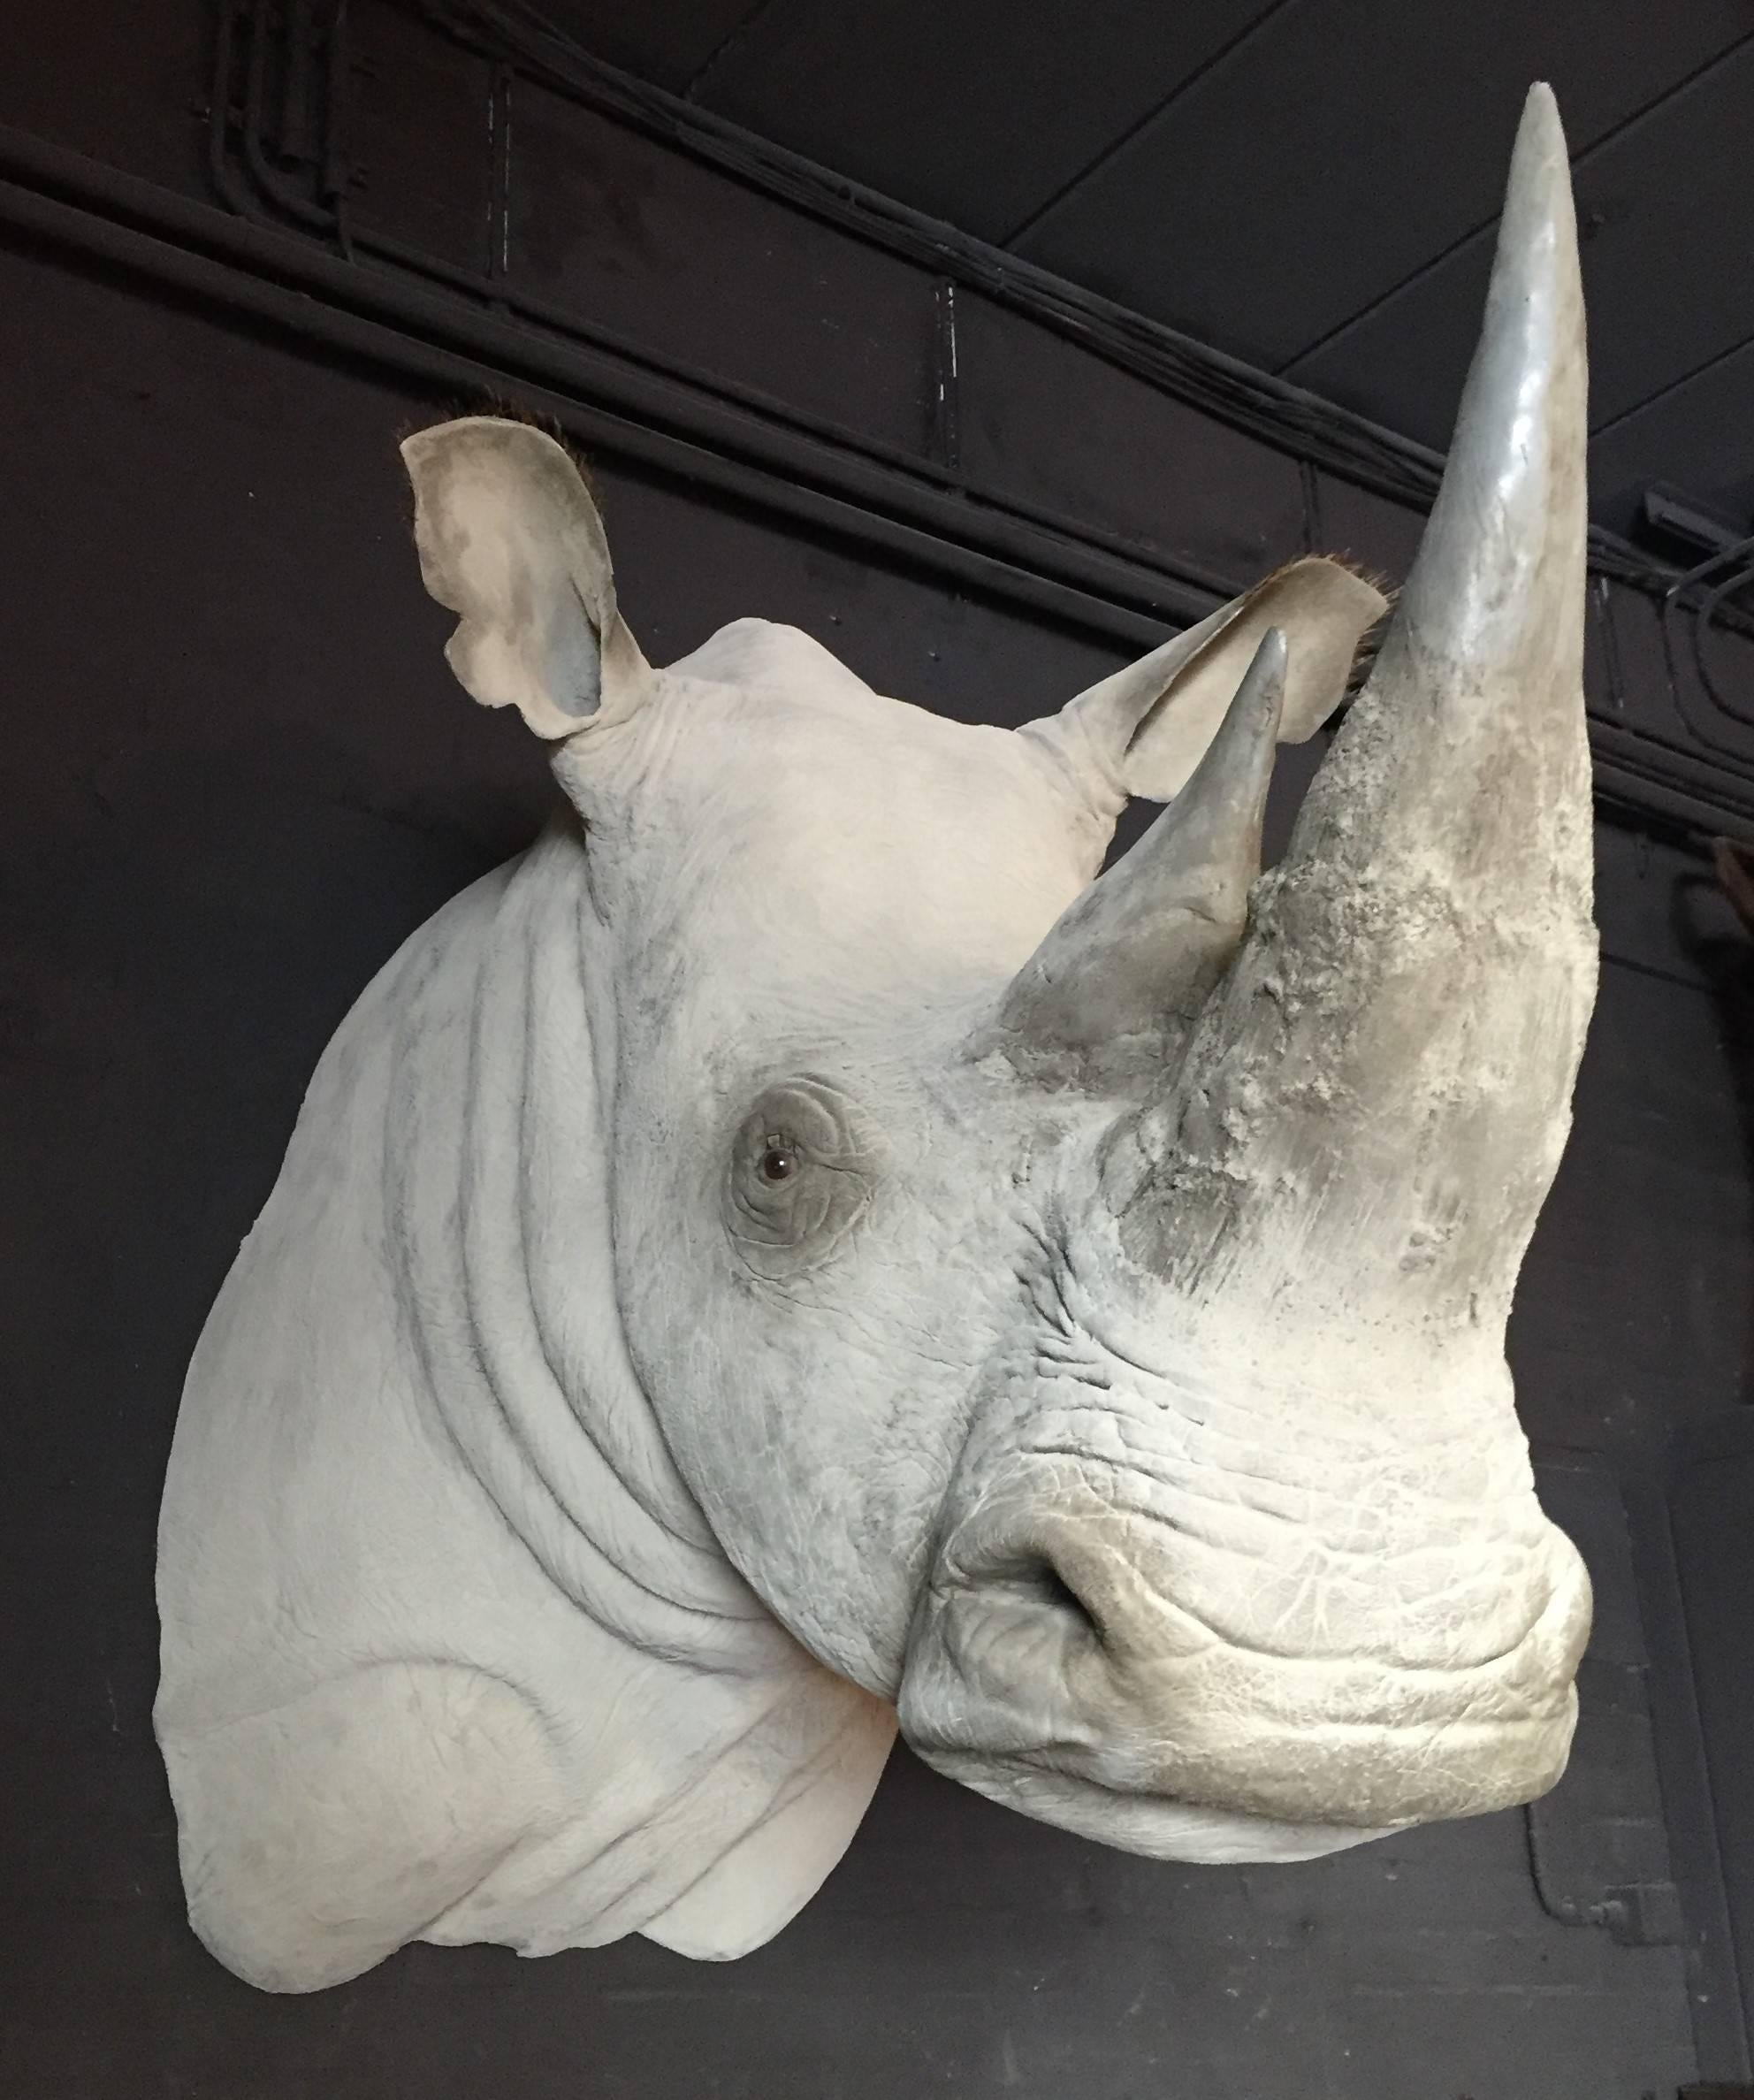 This trophy head is an exact copy of a white rhino. It is lifelike and has a lot of detail. 
The rhino head makes a powerful interior statement.
 